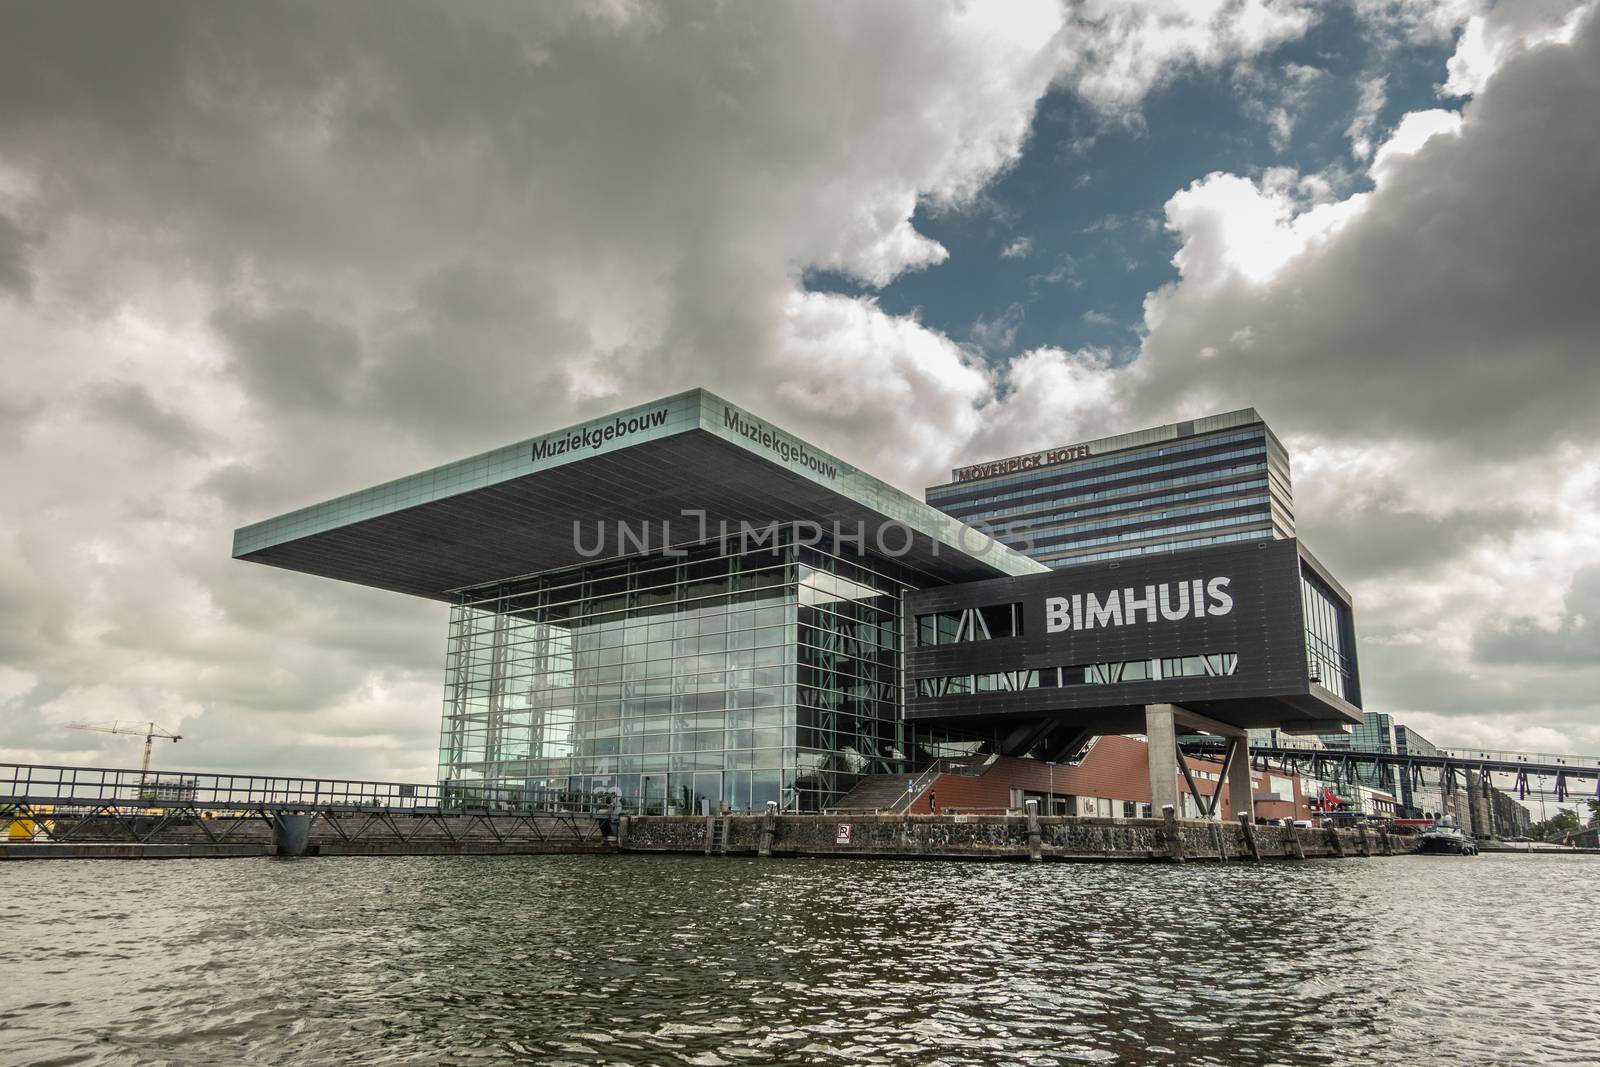 Amsterdam, the Netherlands - July 1, 2019: Modern cubic building housing the music theater and school with Jazz Bimhuis on platform in black water IJ river under havey rainy cloudscape.